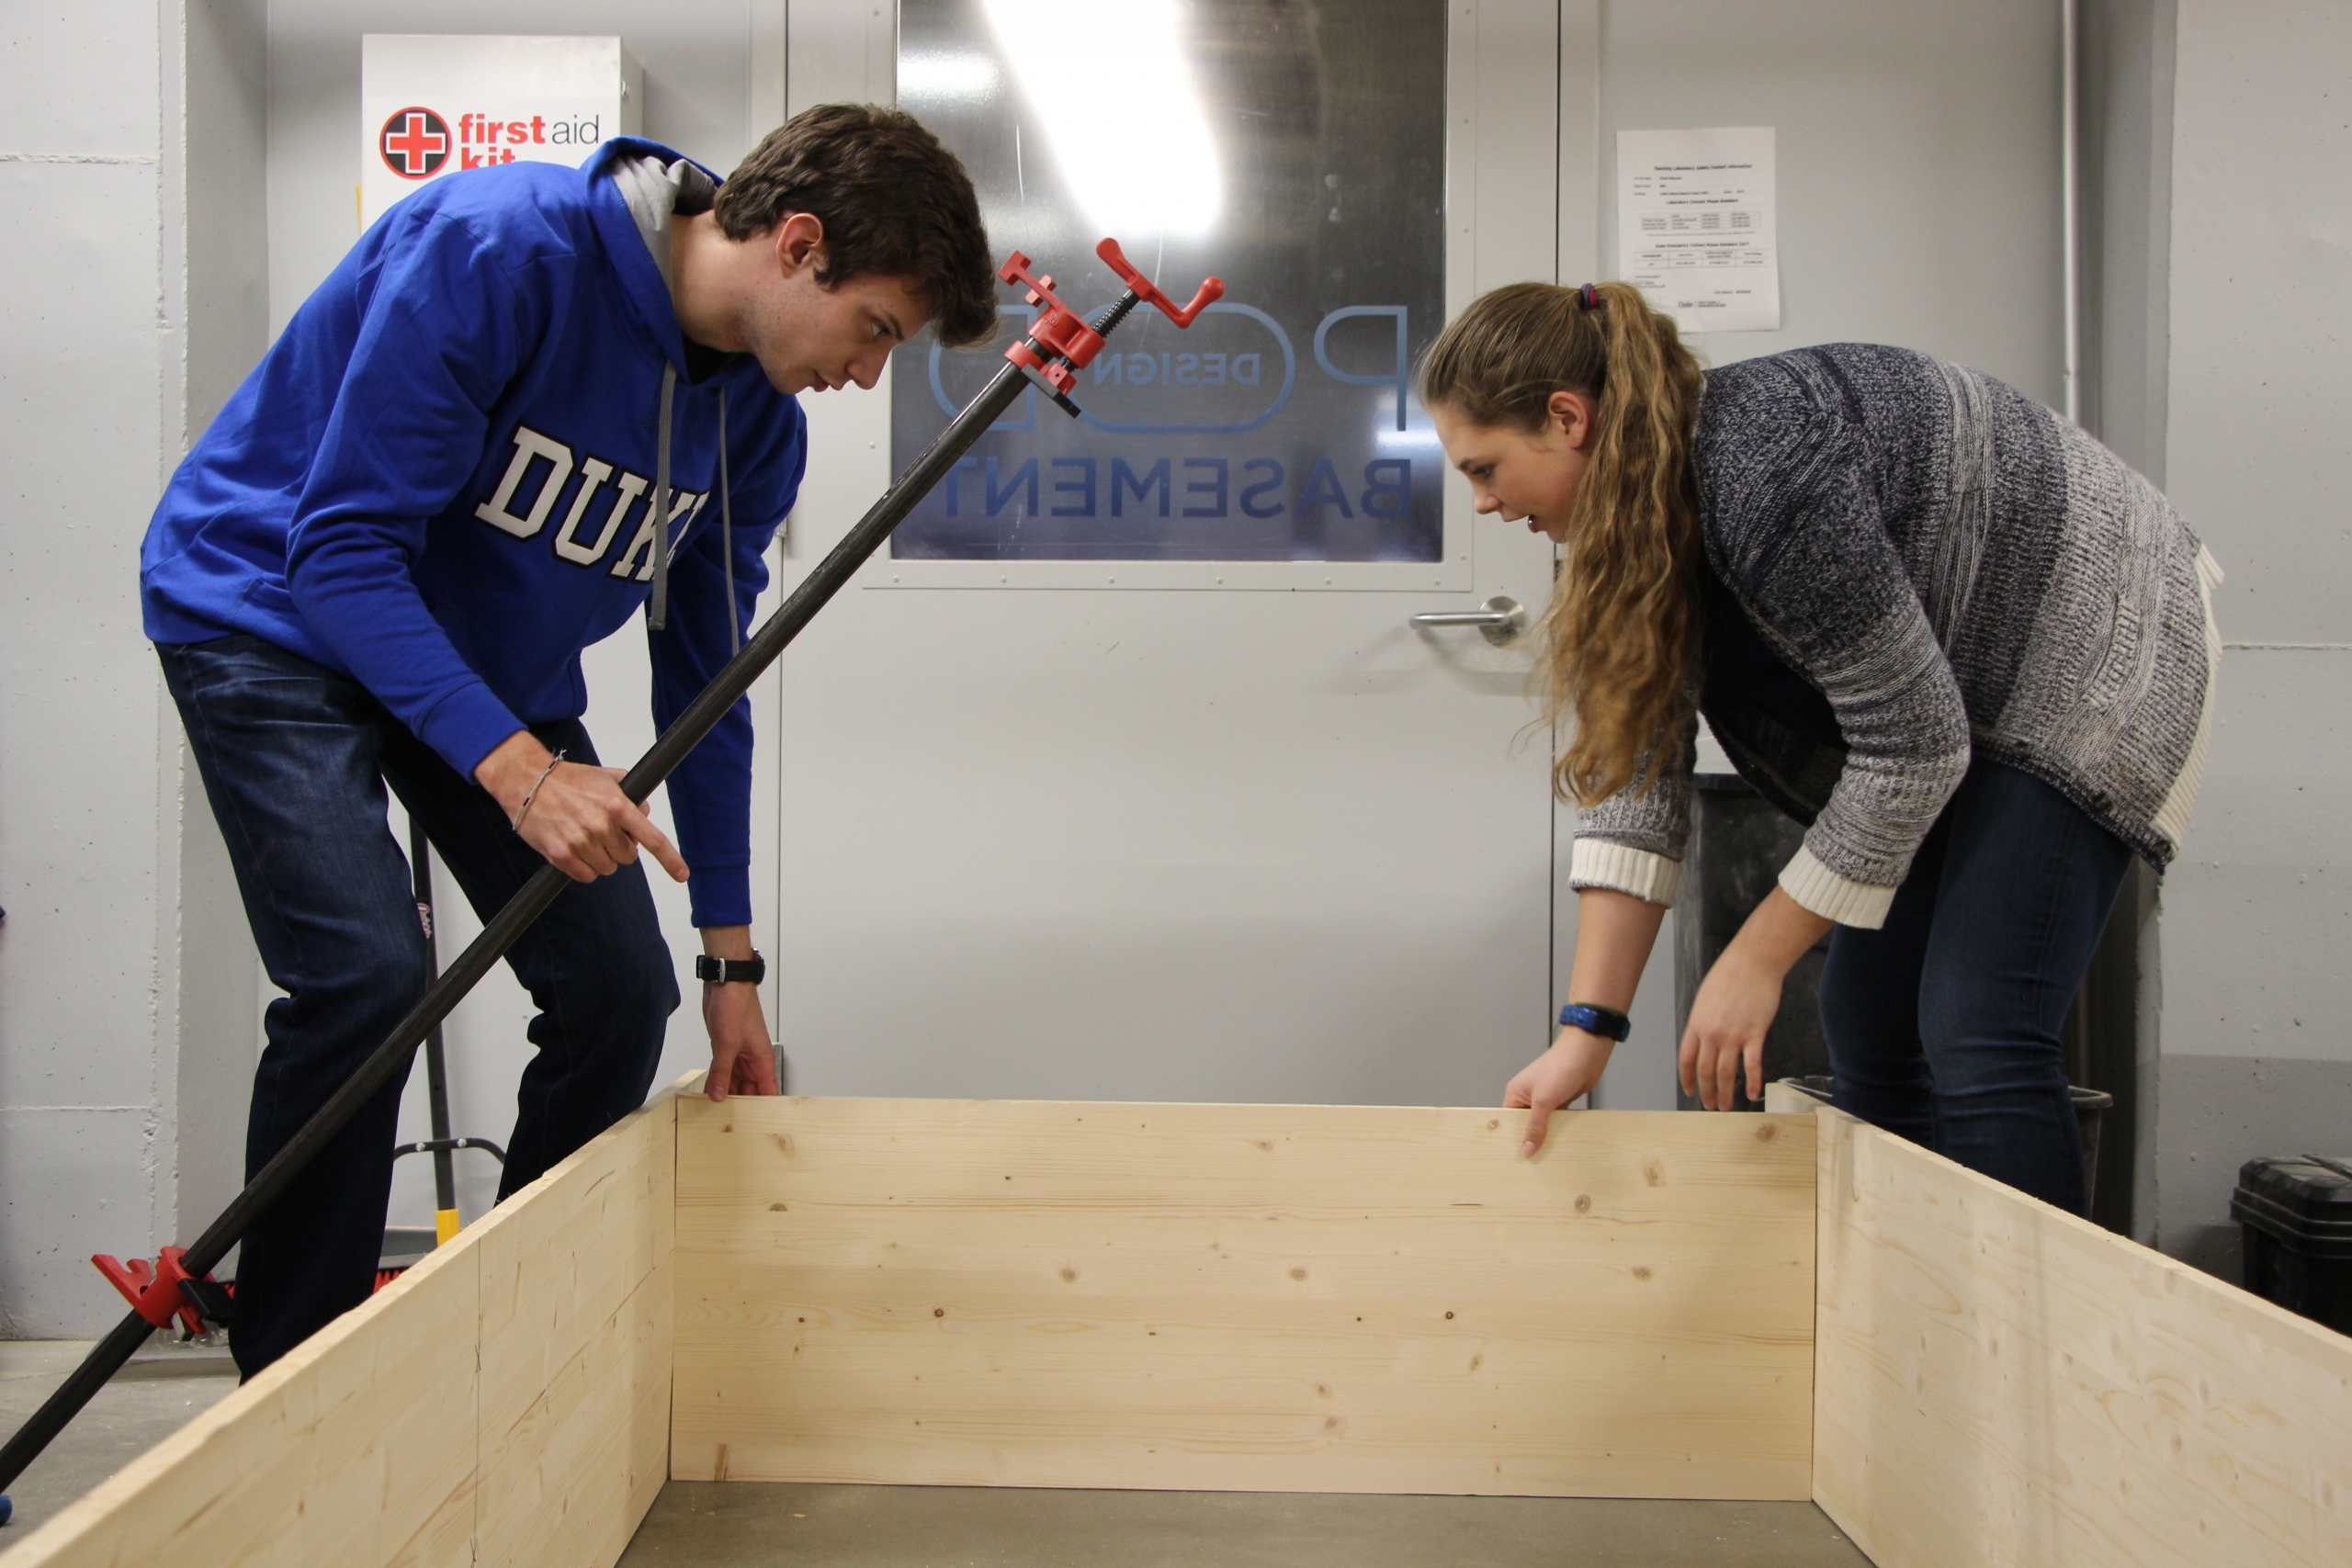 Students begin assembling a bookshelf to be placed in the shipping container